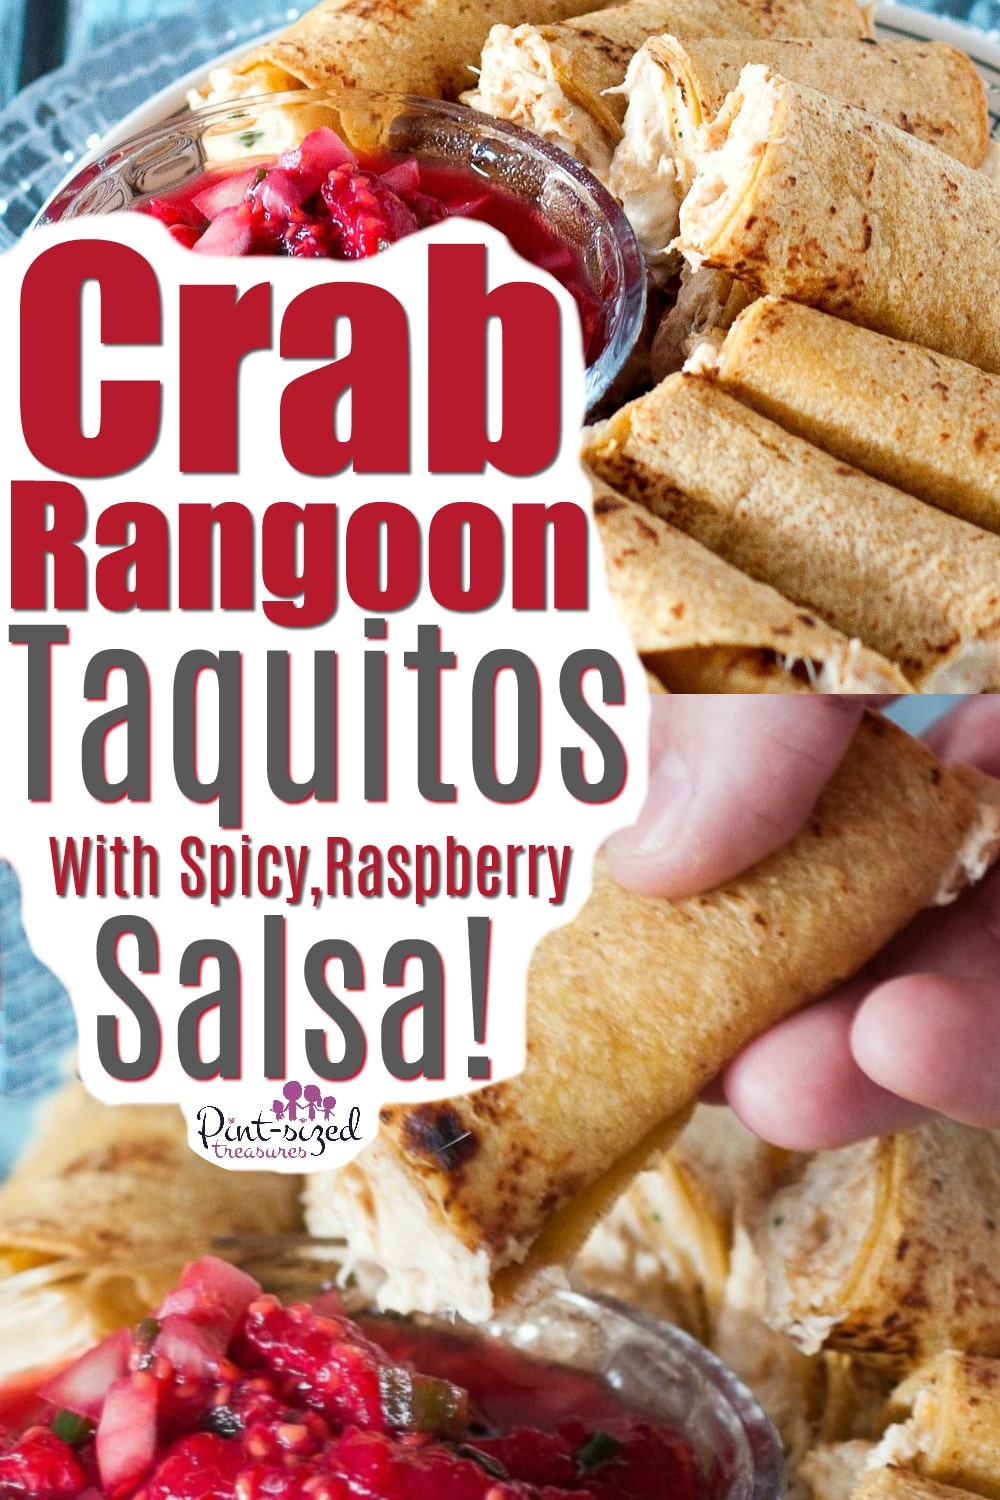 Easy crab rangoon taquitos are incredibly fun and creative! They take your favorite crab rangoon recipe and turn into a perfectly, baked taquito! Then, all those flavors get dipped into our famous, homemade, spicy, raspberry salsa!